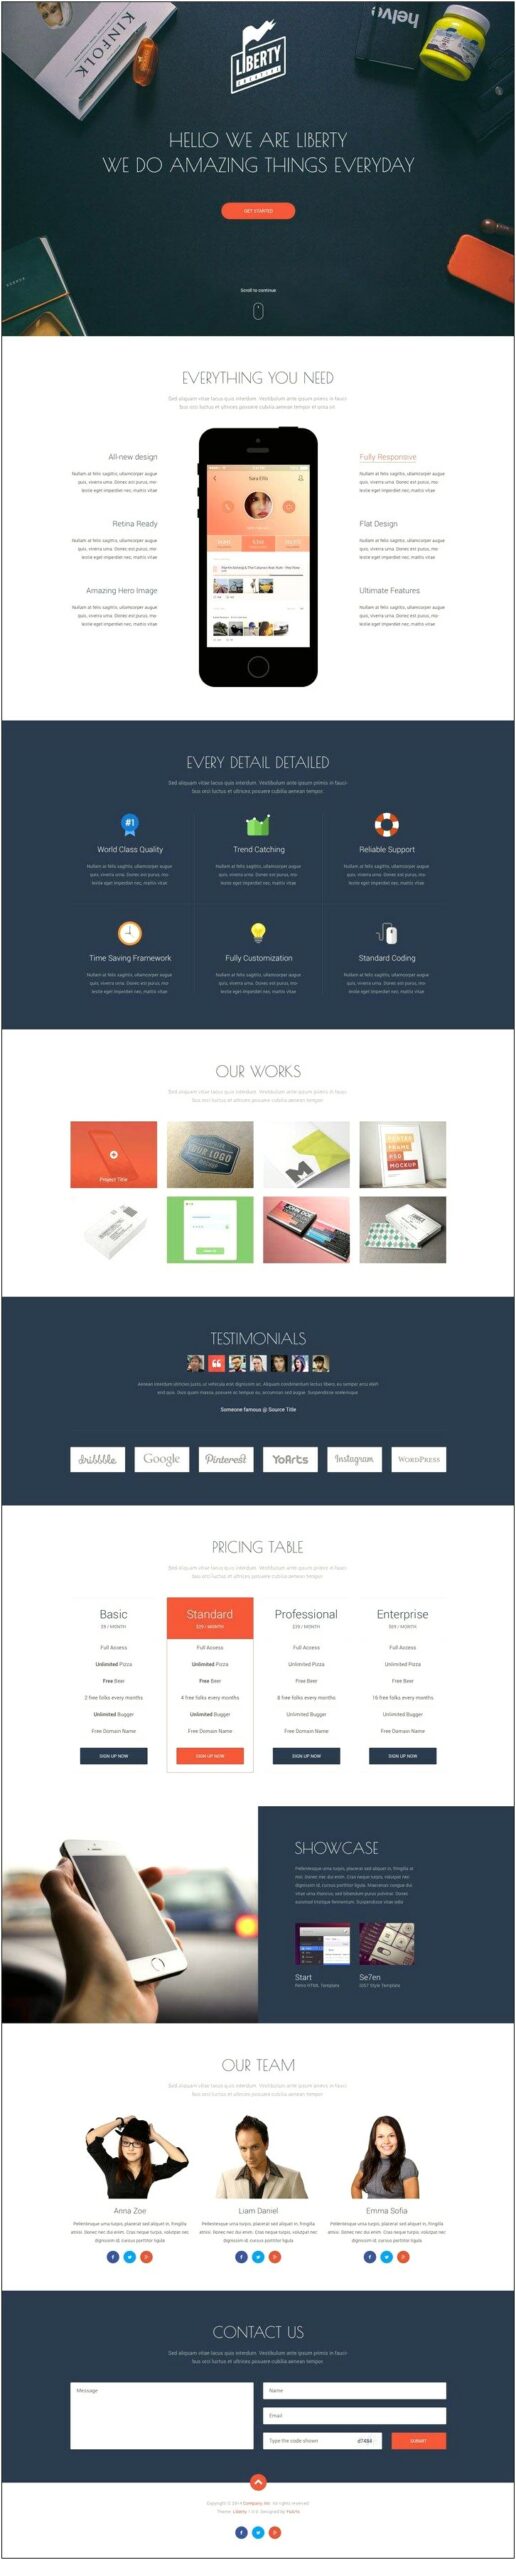 Psd Web Templates Free Download For Photoshop